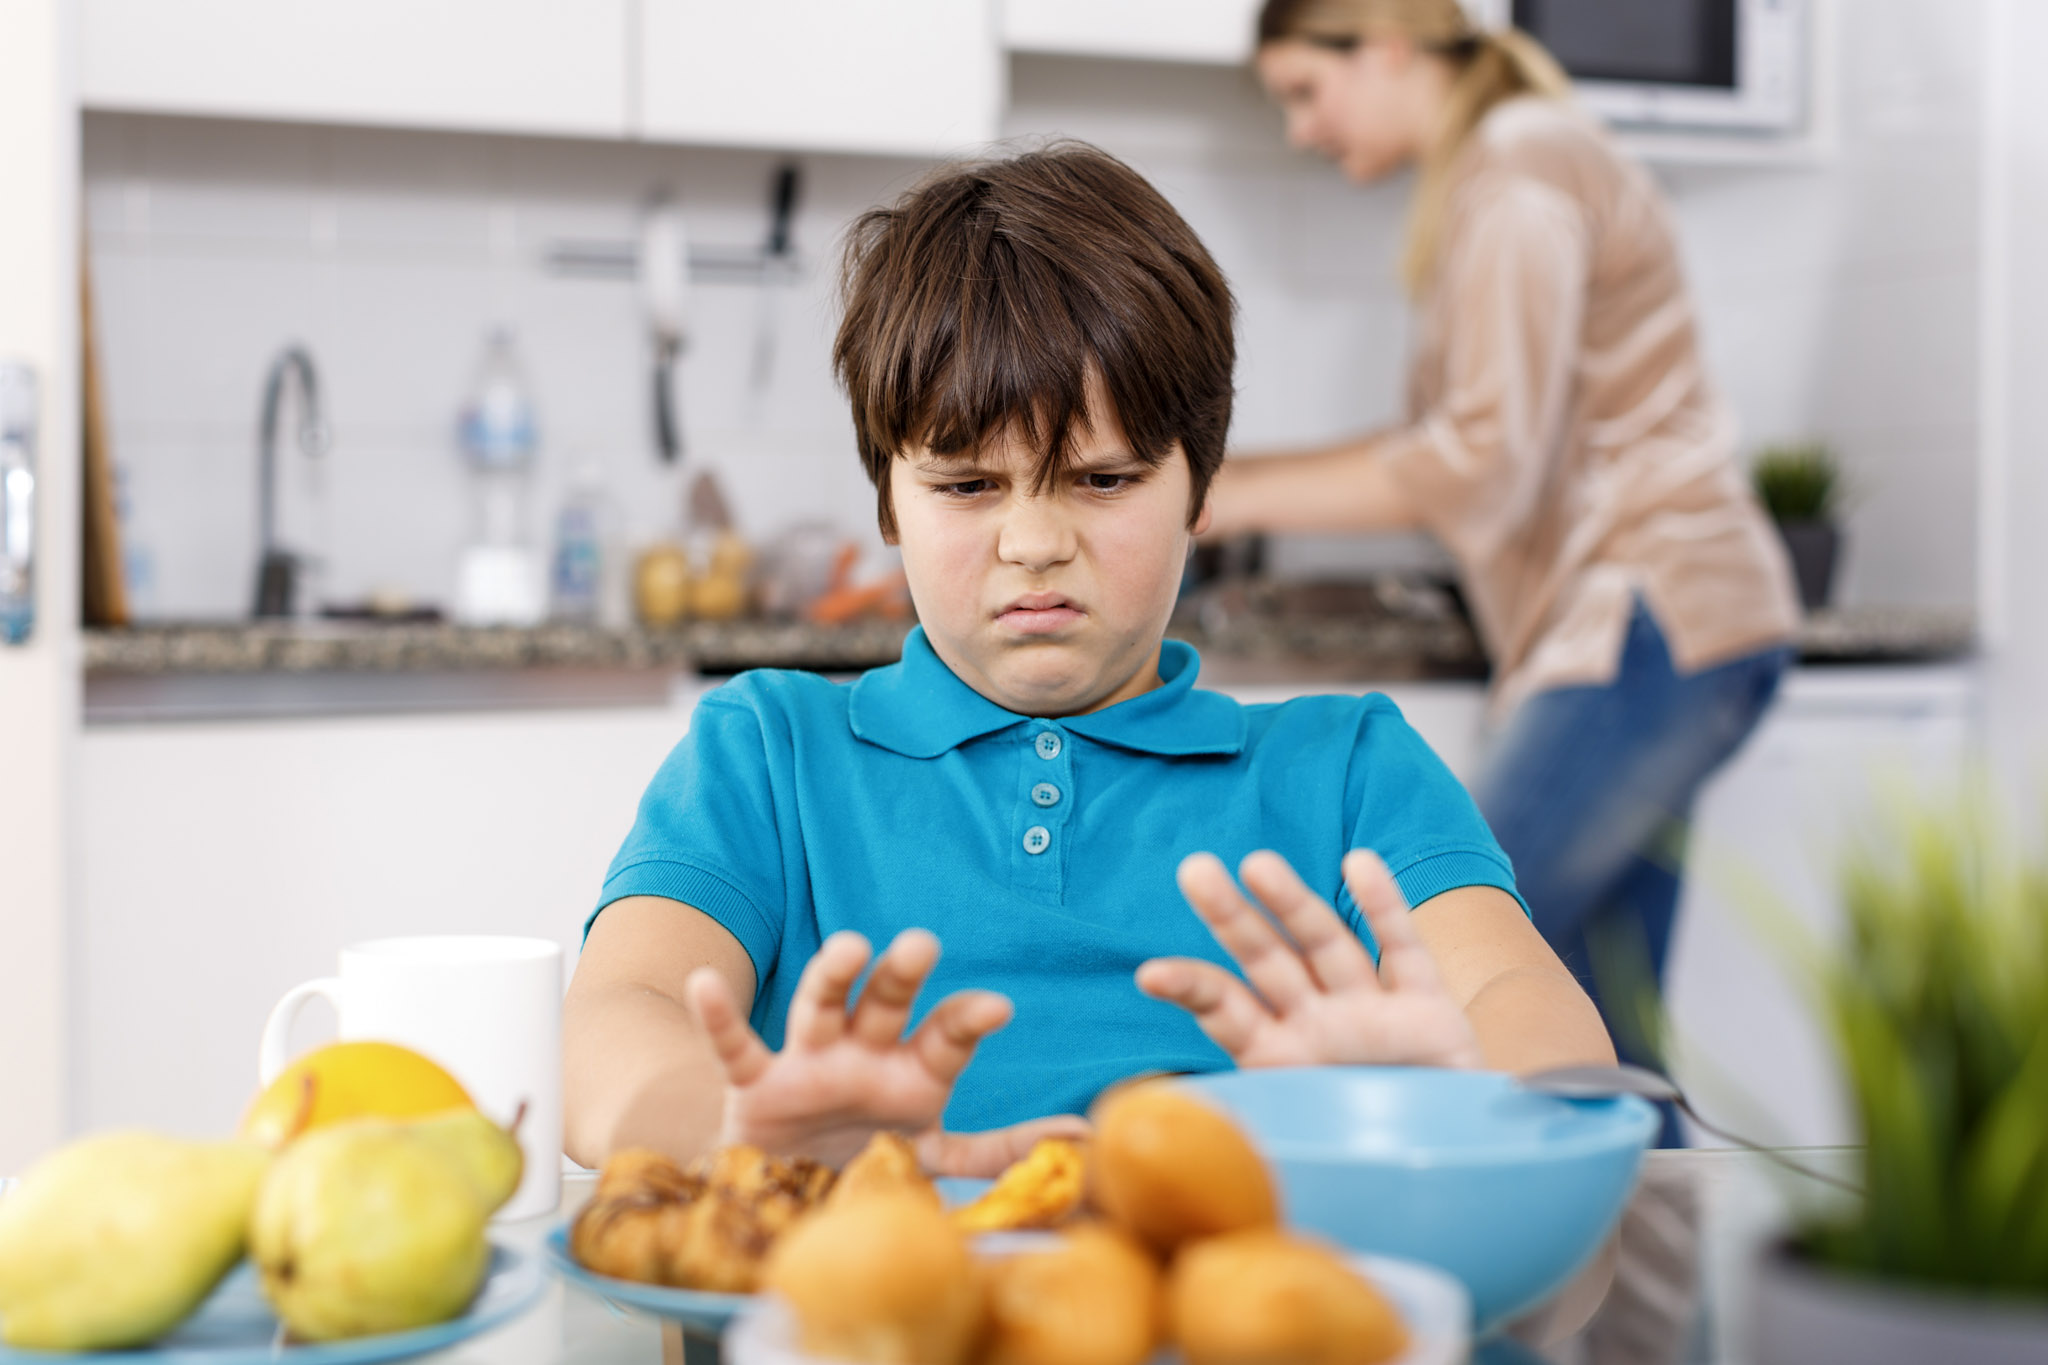 stock photo of a young boy sitting at a kitchen table, refusing to eat the food in front of him